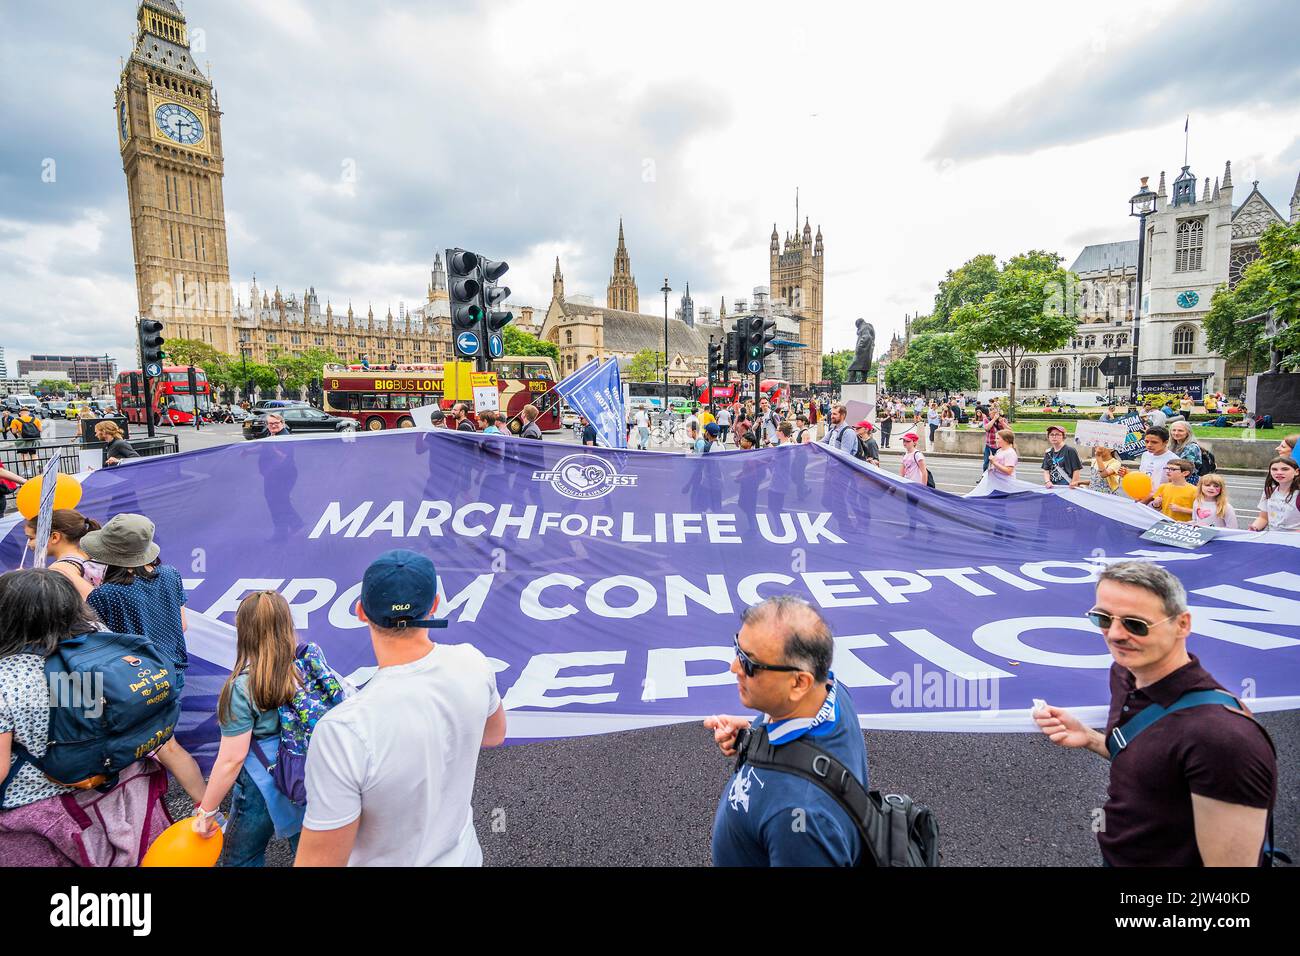 London, UK. 3rd Sep, 2022. The March for Life UK organised by Campaigners from Right To Life UK ends up in Parliament Square with the message 10 million too many. Right to life is an organisation focused on life issues - against abortion, assisted suicide and embryo research. Credit: Guy Bell/Alamy Live News Stock Photo